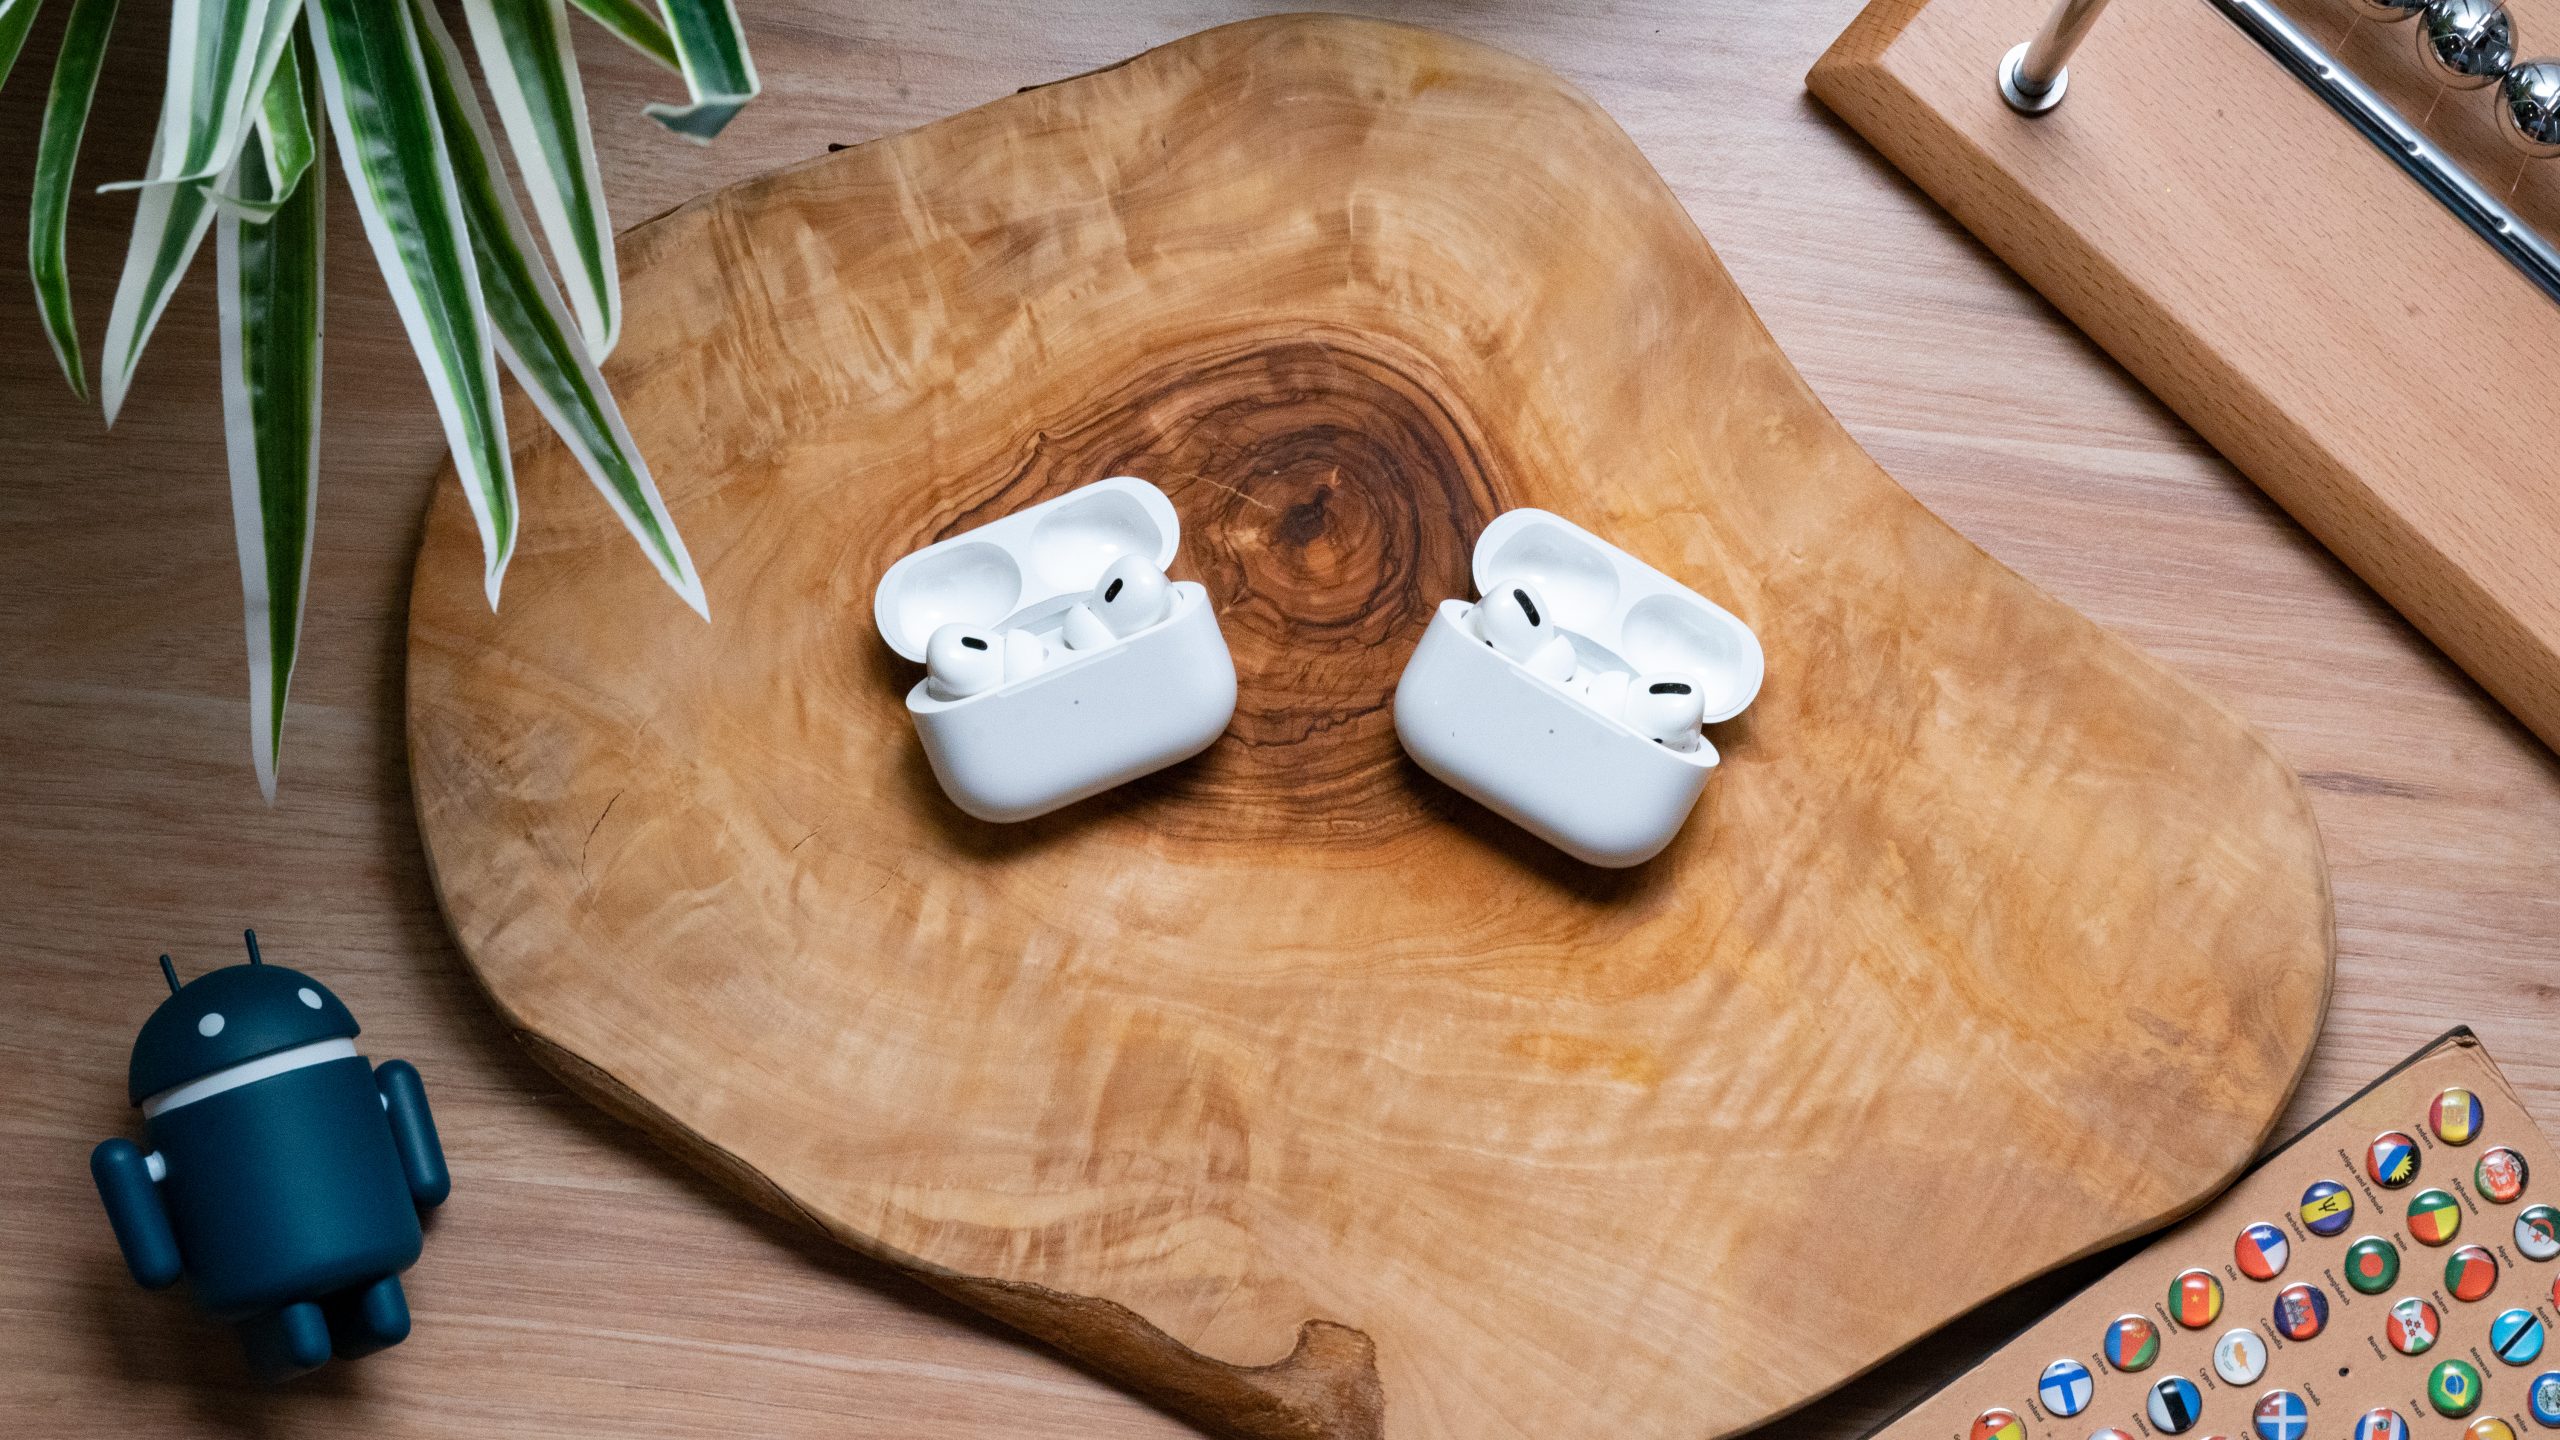 The Apple AirPods Pro (2nd generation) lays on a wooden surface next to the Apple AirPods Pro (1st generation), earbuds in open cases, shot from above.